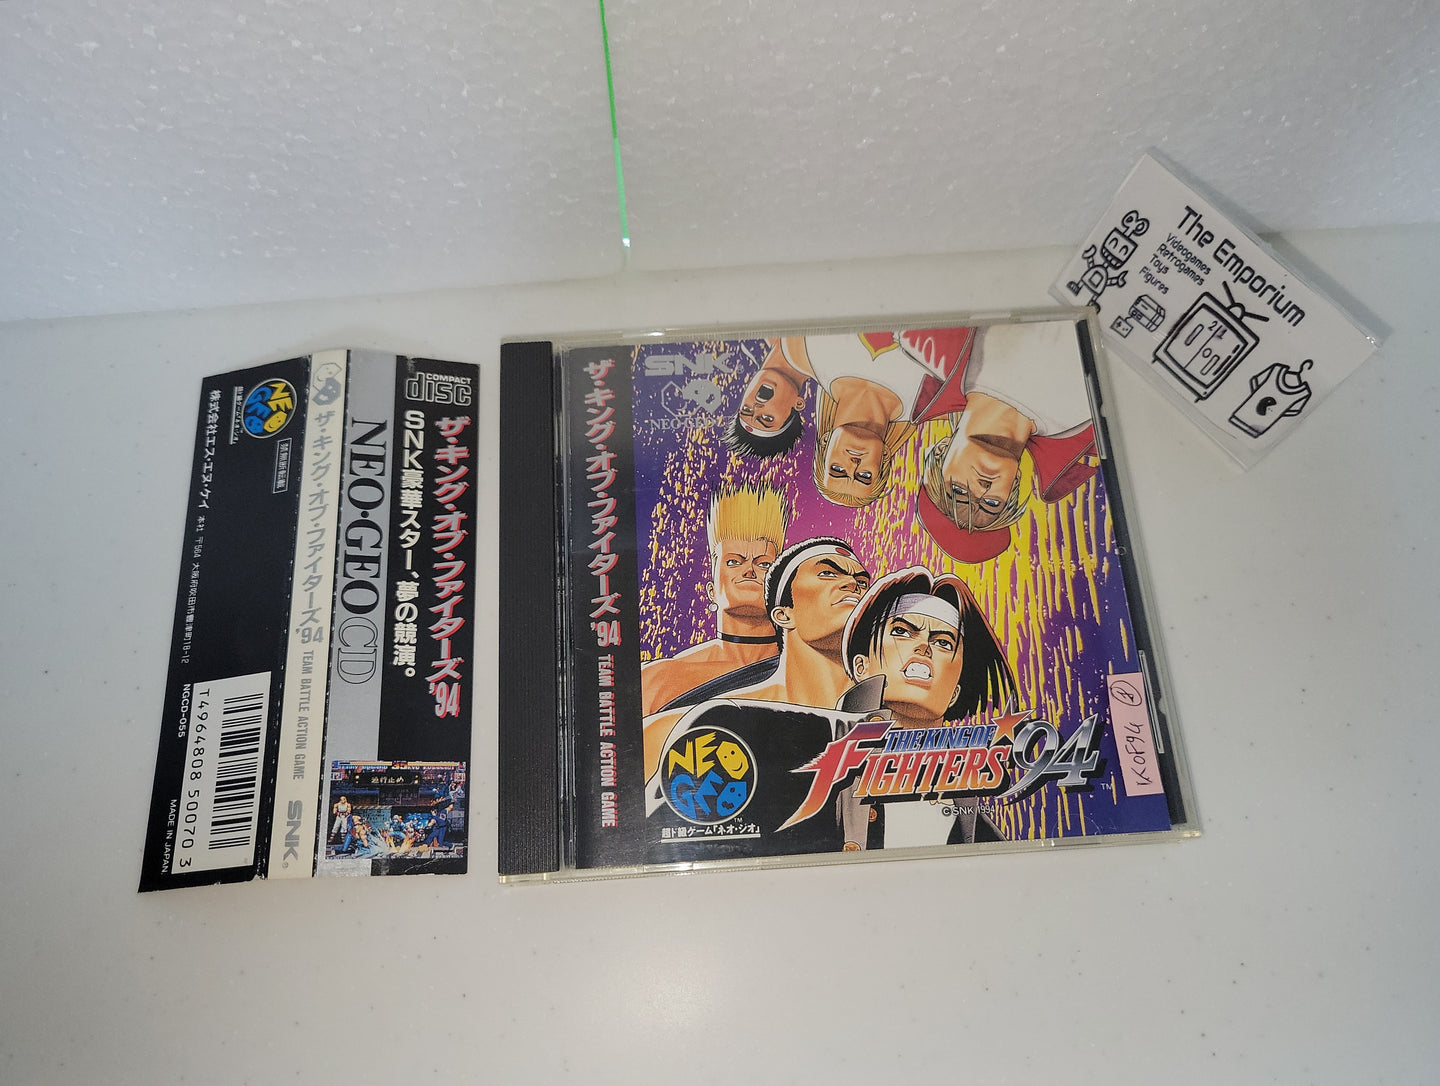 The King of fighters 94 - Snk Neogeo cd ngcd